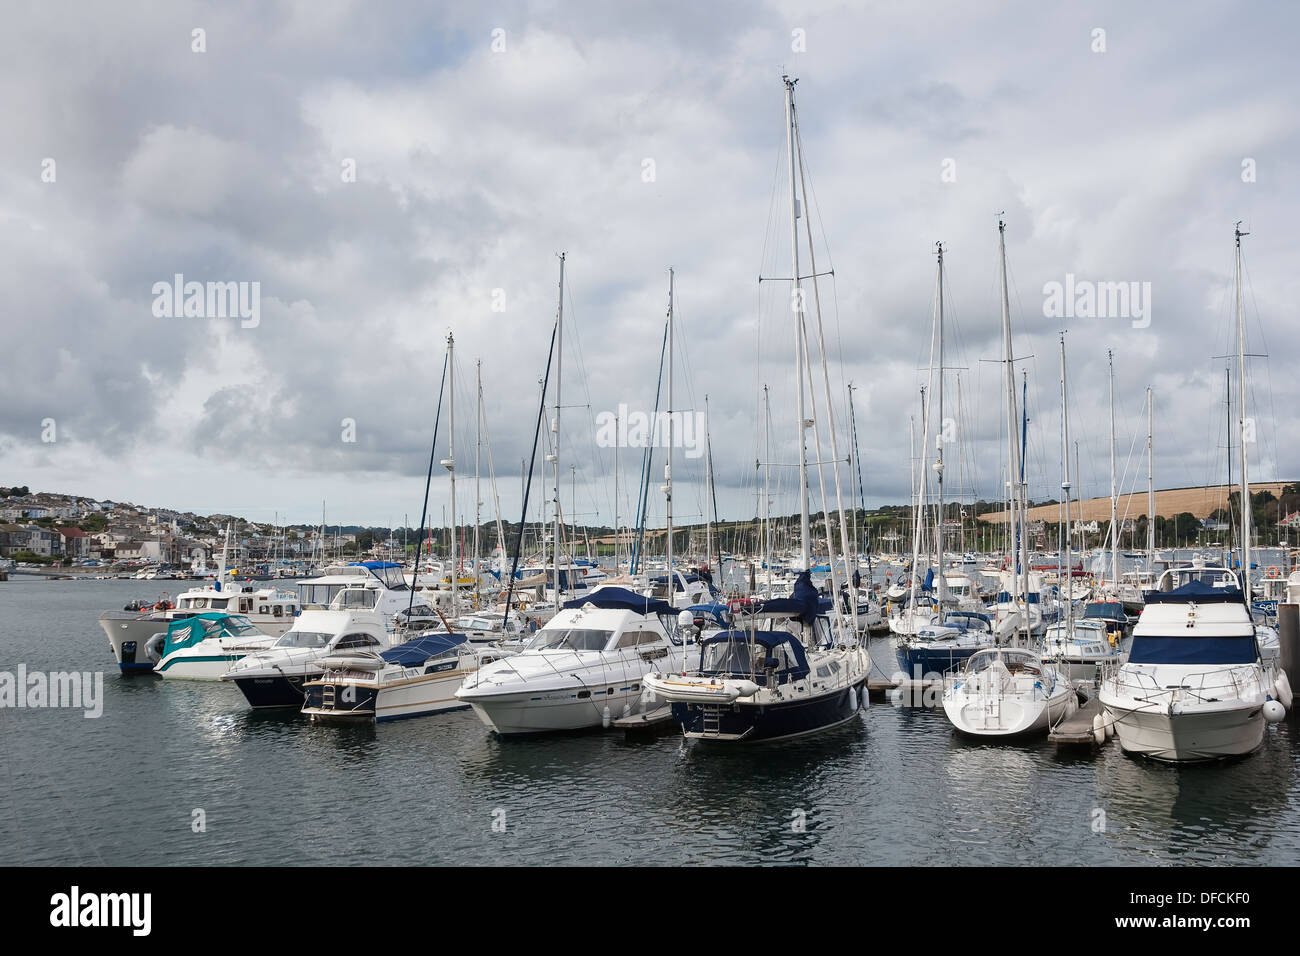 sailing boats and yachts in harbour Stock Photo